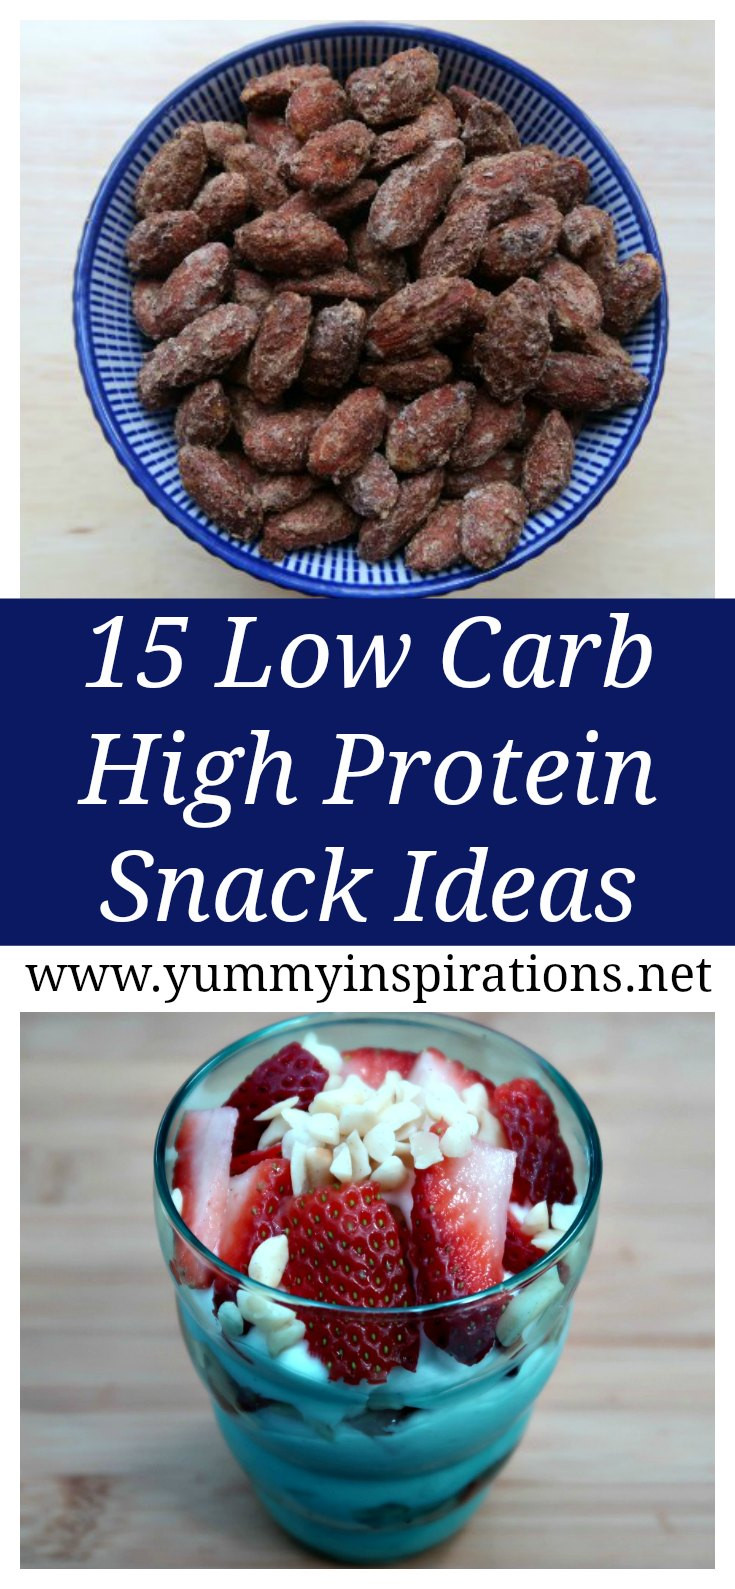 Keto Diet Snacks Low Carb
 15 Low Carb High Protein Snacks Ideas For Easy Keto Diet